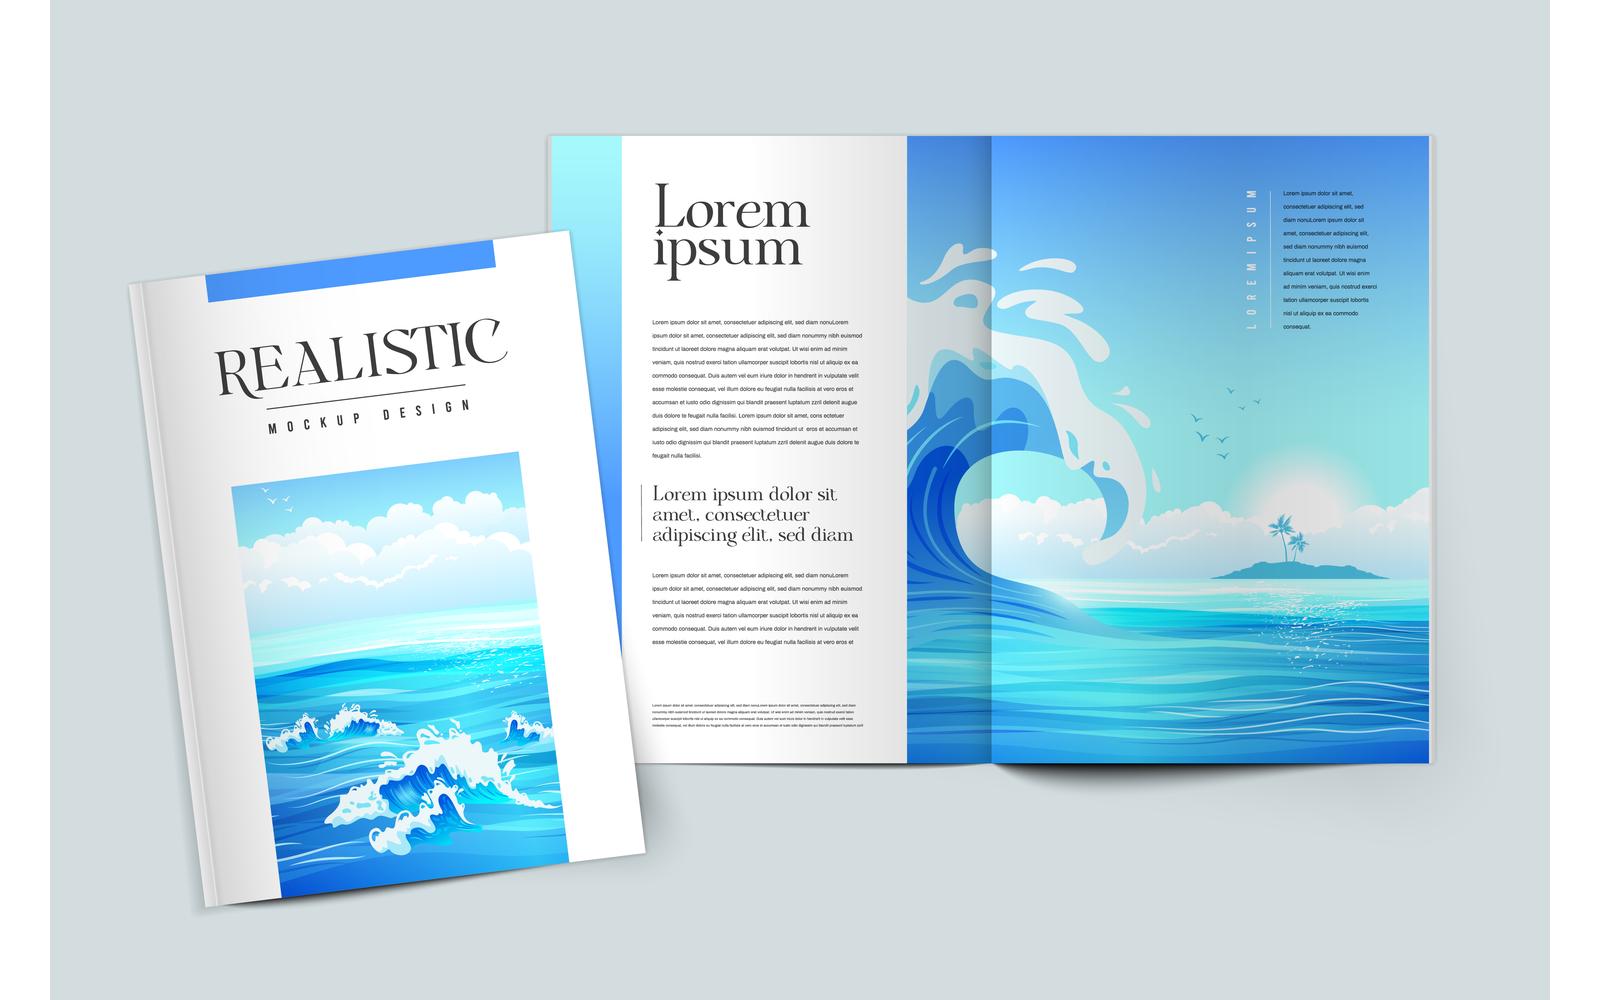 Realistic Layout Cover Mockup Design Templates 210151804 Vector Illustration Concept